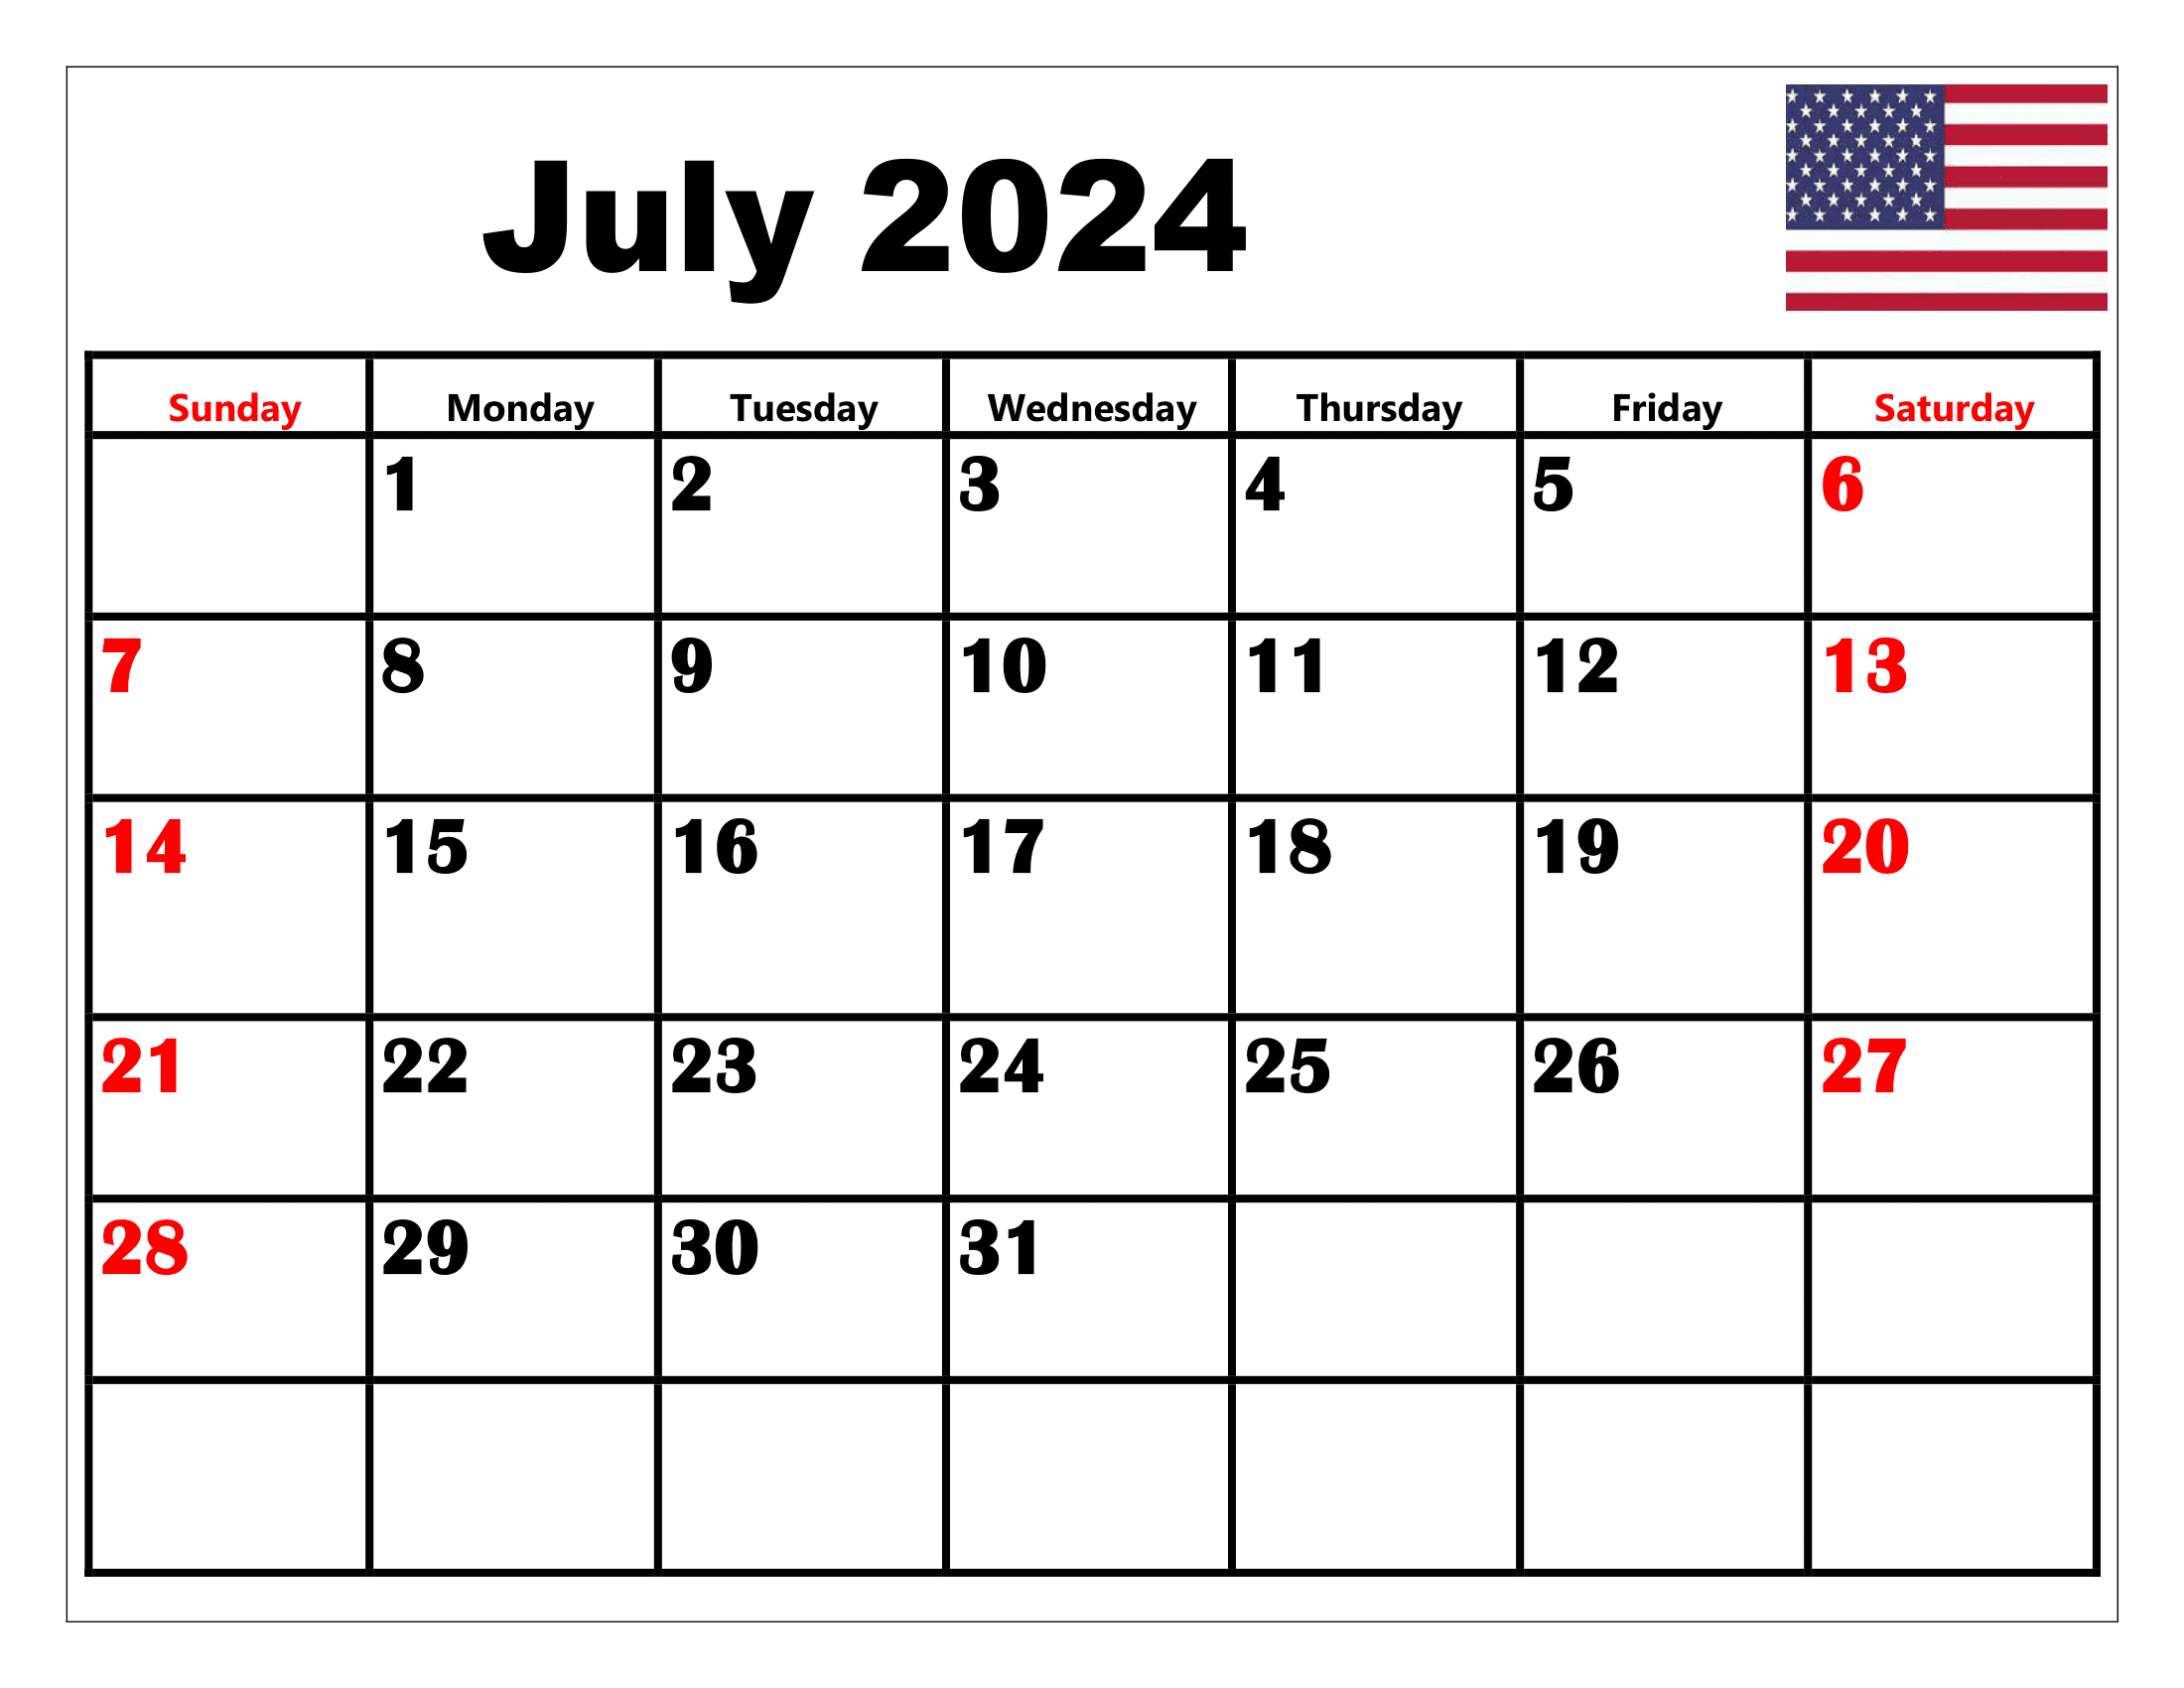 July 2024 Calendar Printable Pdf With Holidays Free Template intended for Calendar For July 2024 With Holidays